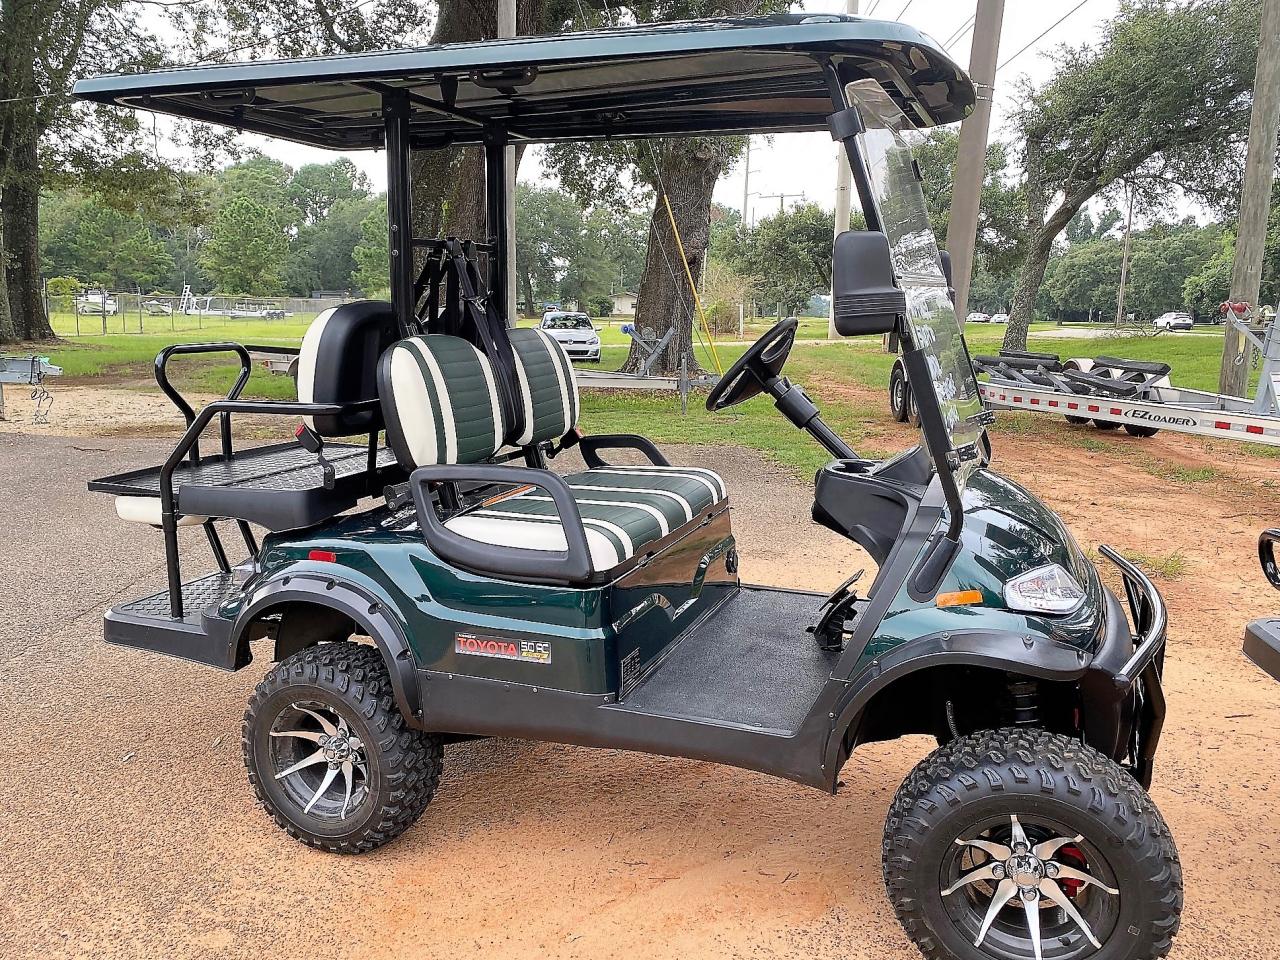 Used Golf Carts for Sale by Owner in Yoakum, Texas: Find Your Perfect Ride Today!